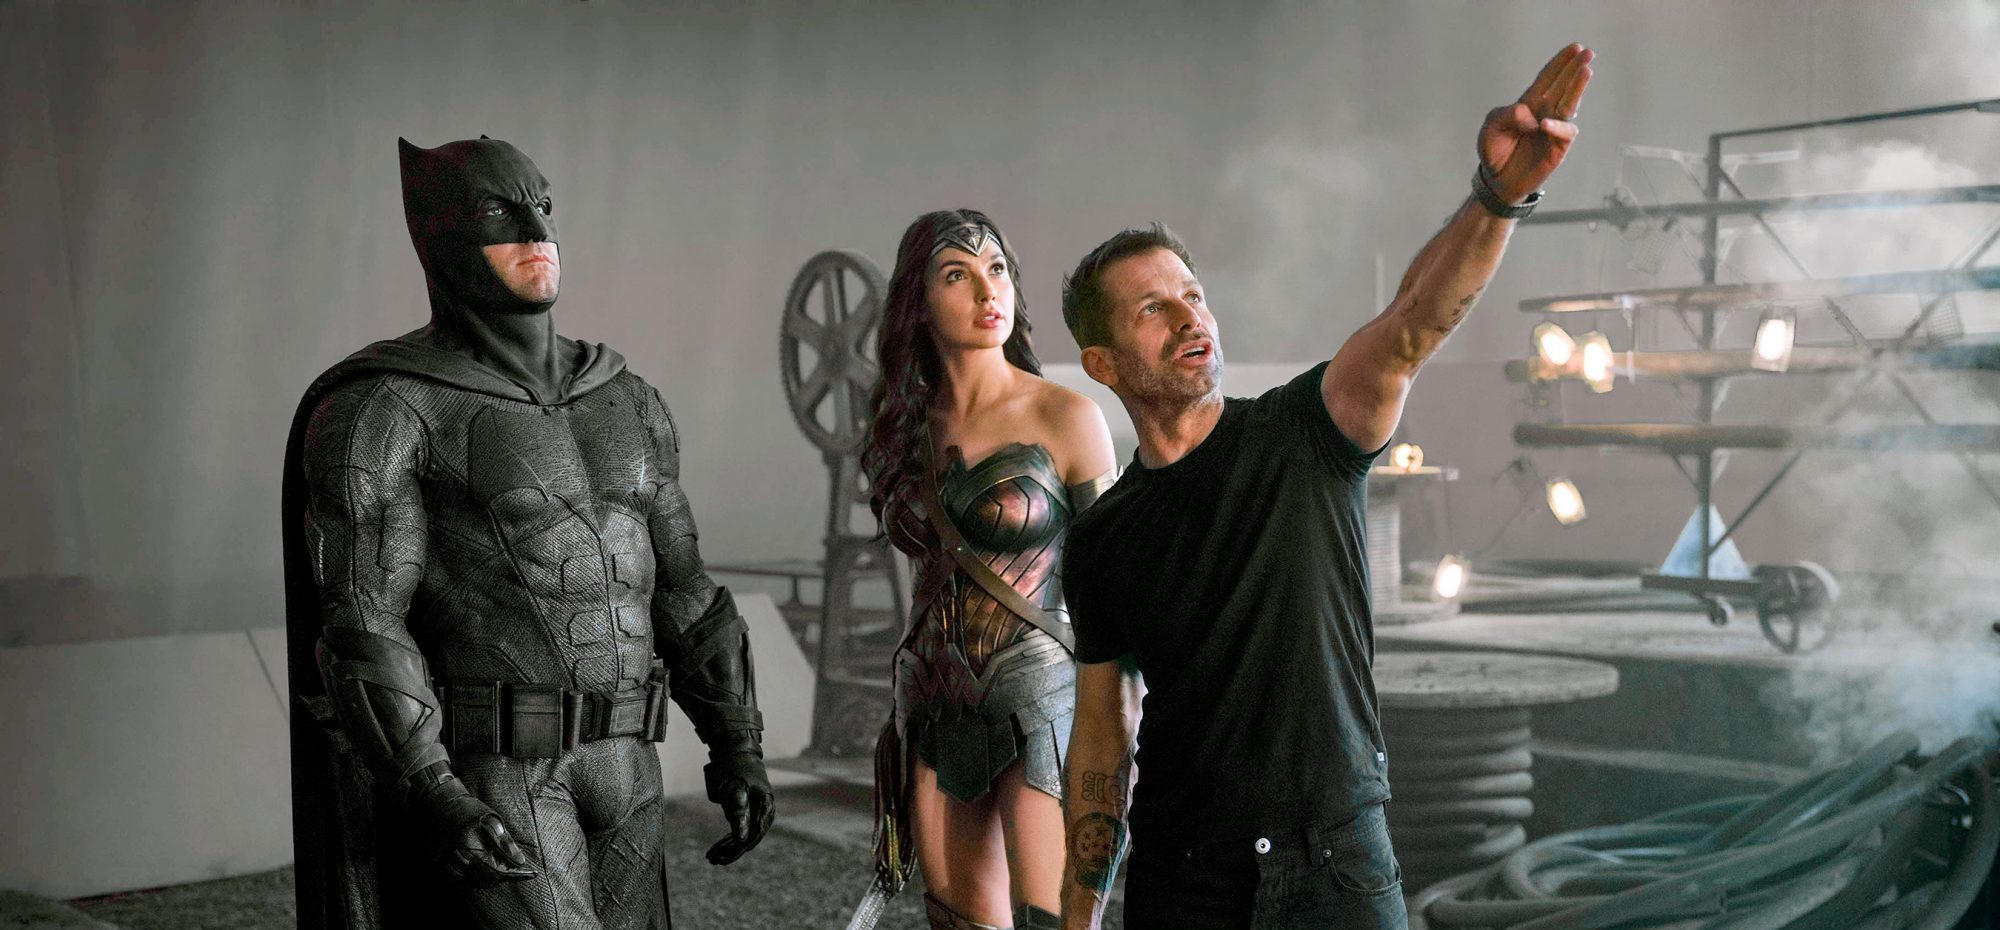 The Snyder Cut